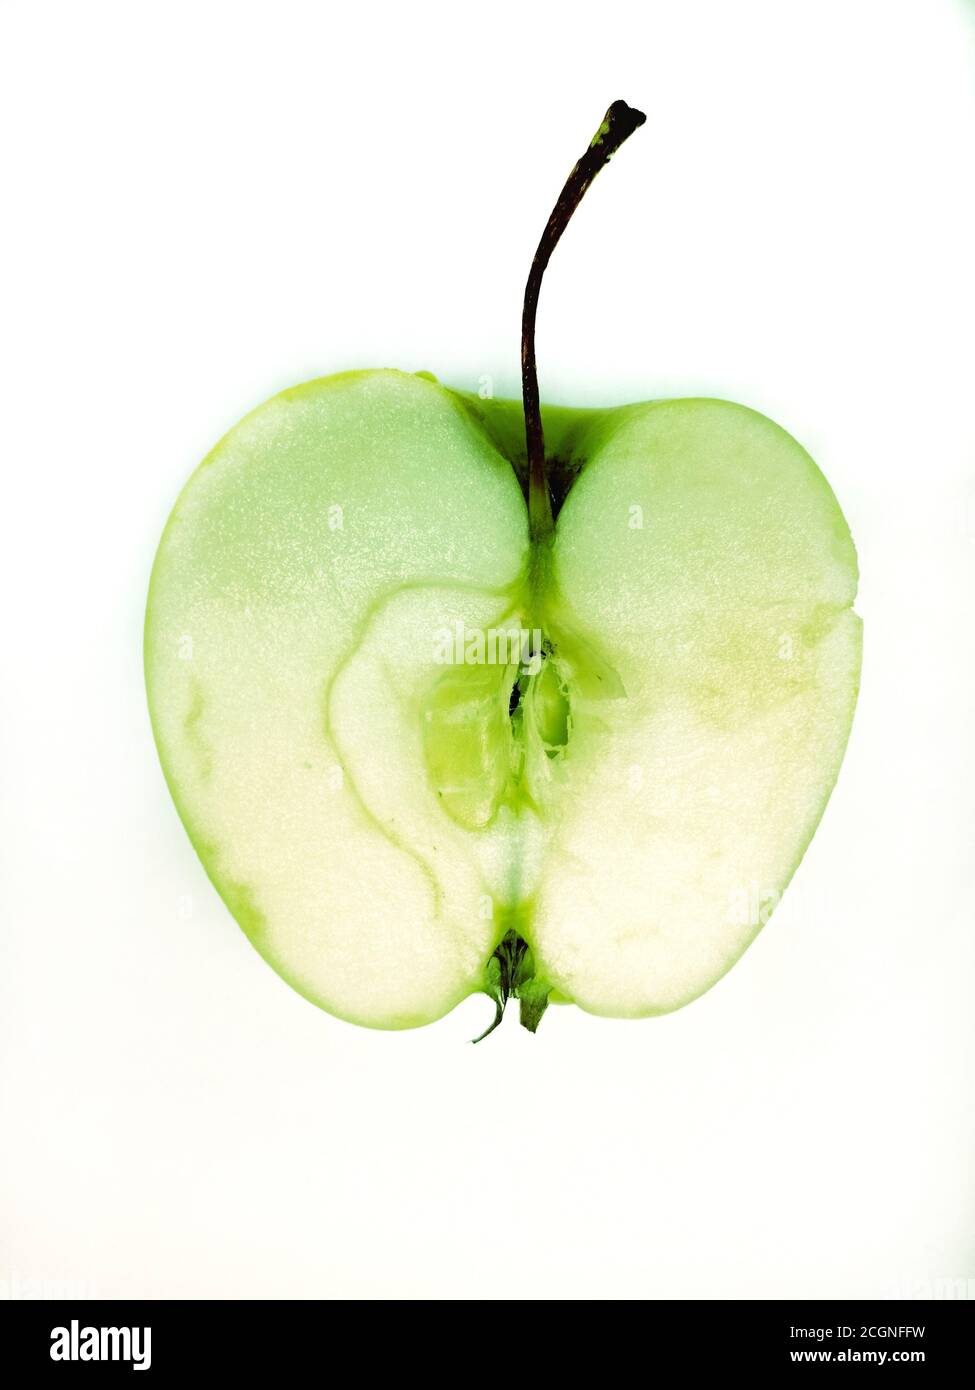 slice of a granny smith apple in white background Stock Photo